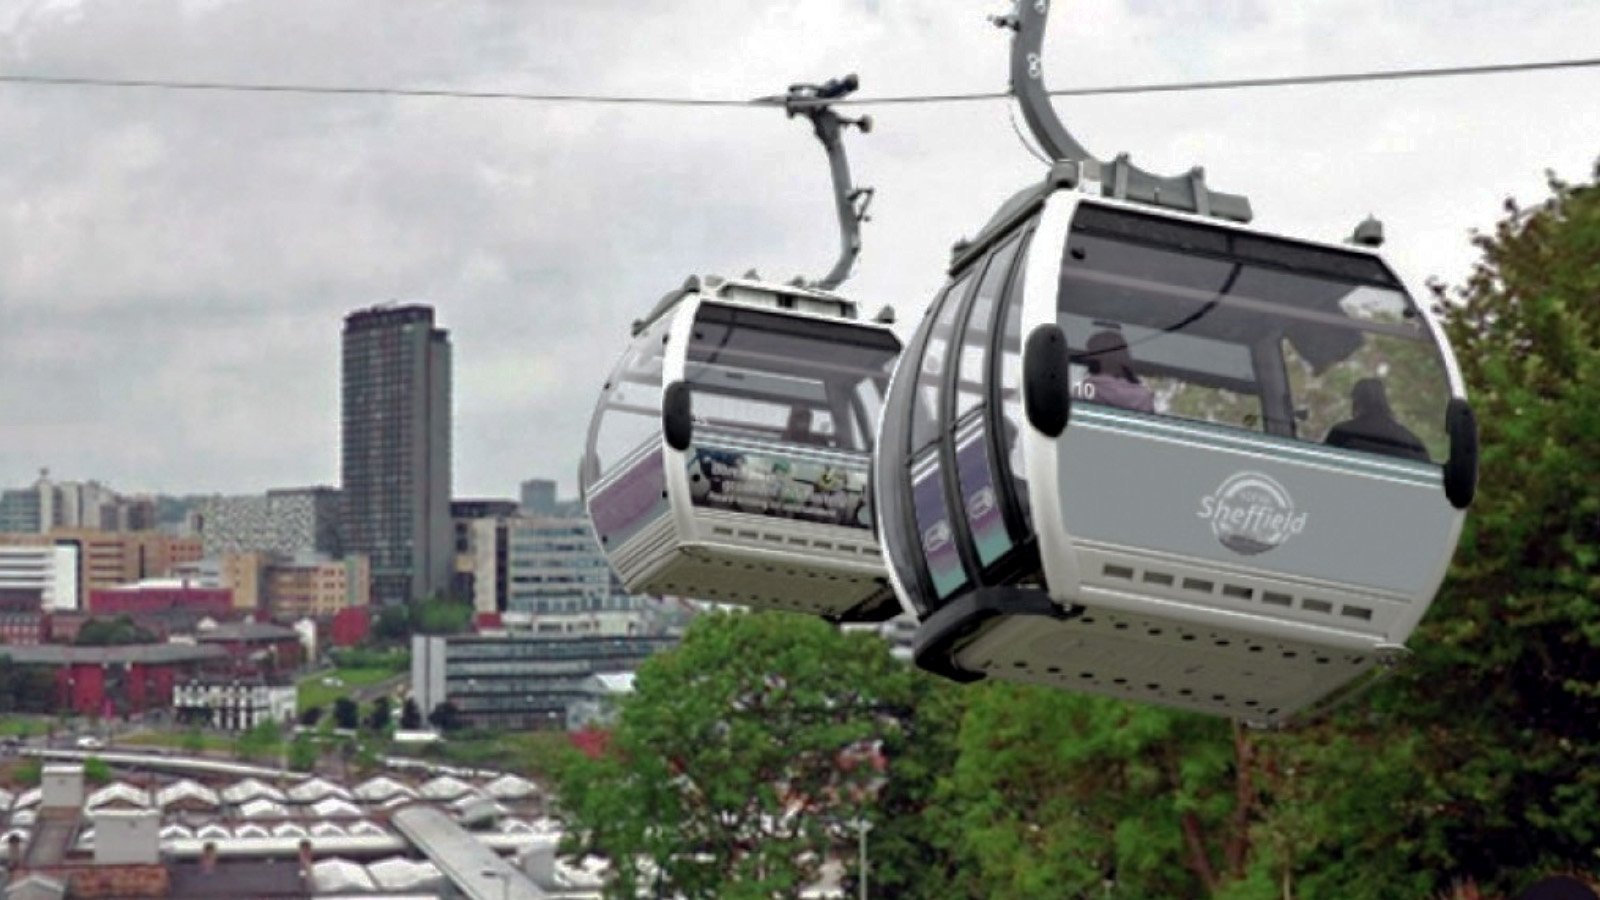 Sheffield Cableway: A Cable Car solution for the Steel City?